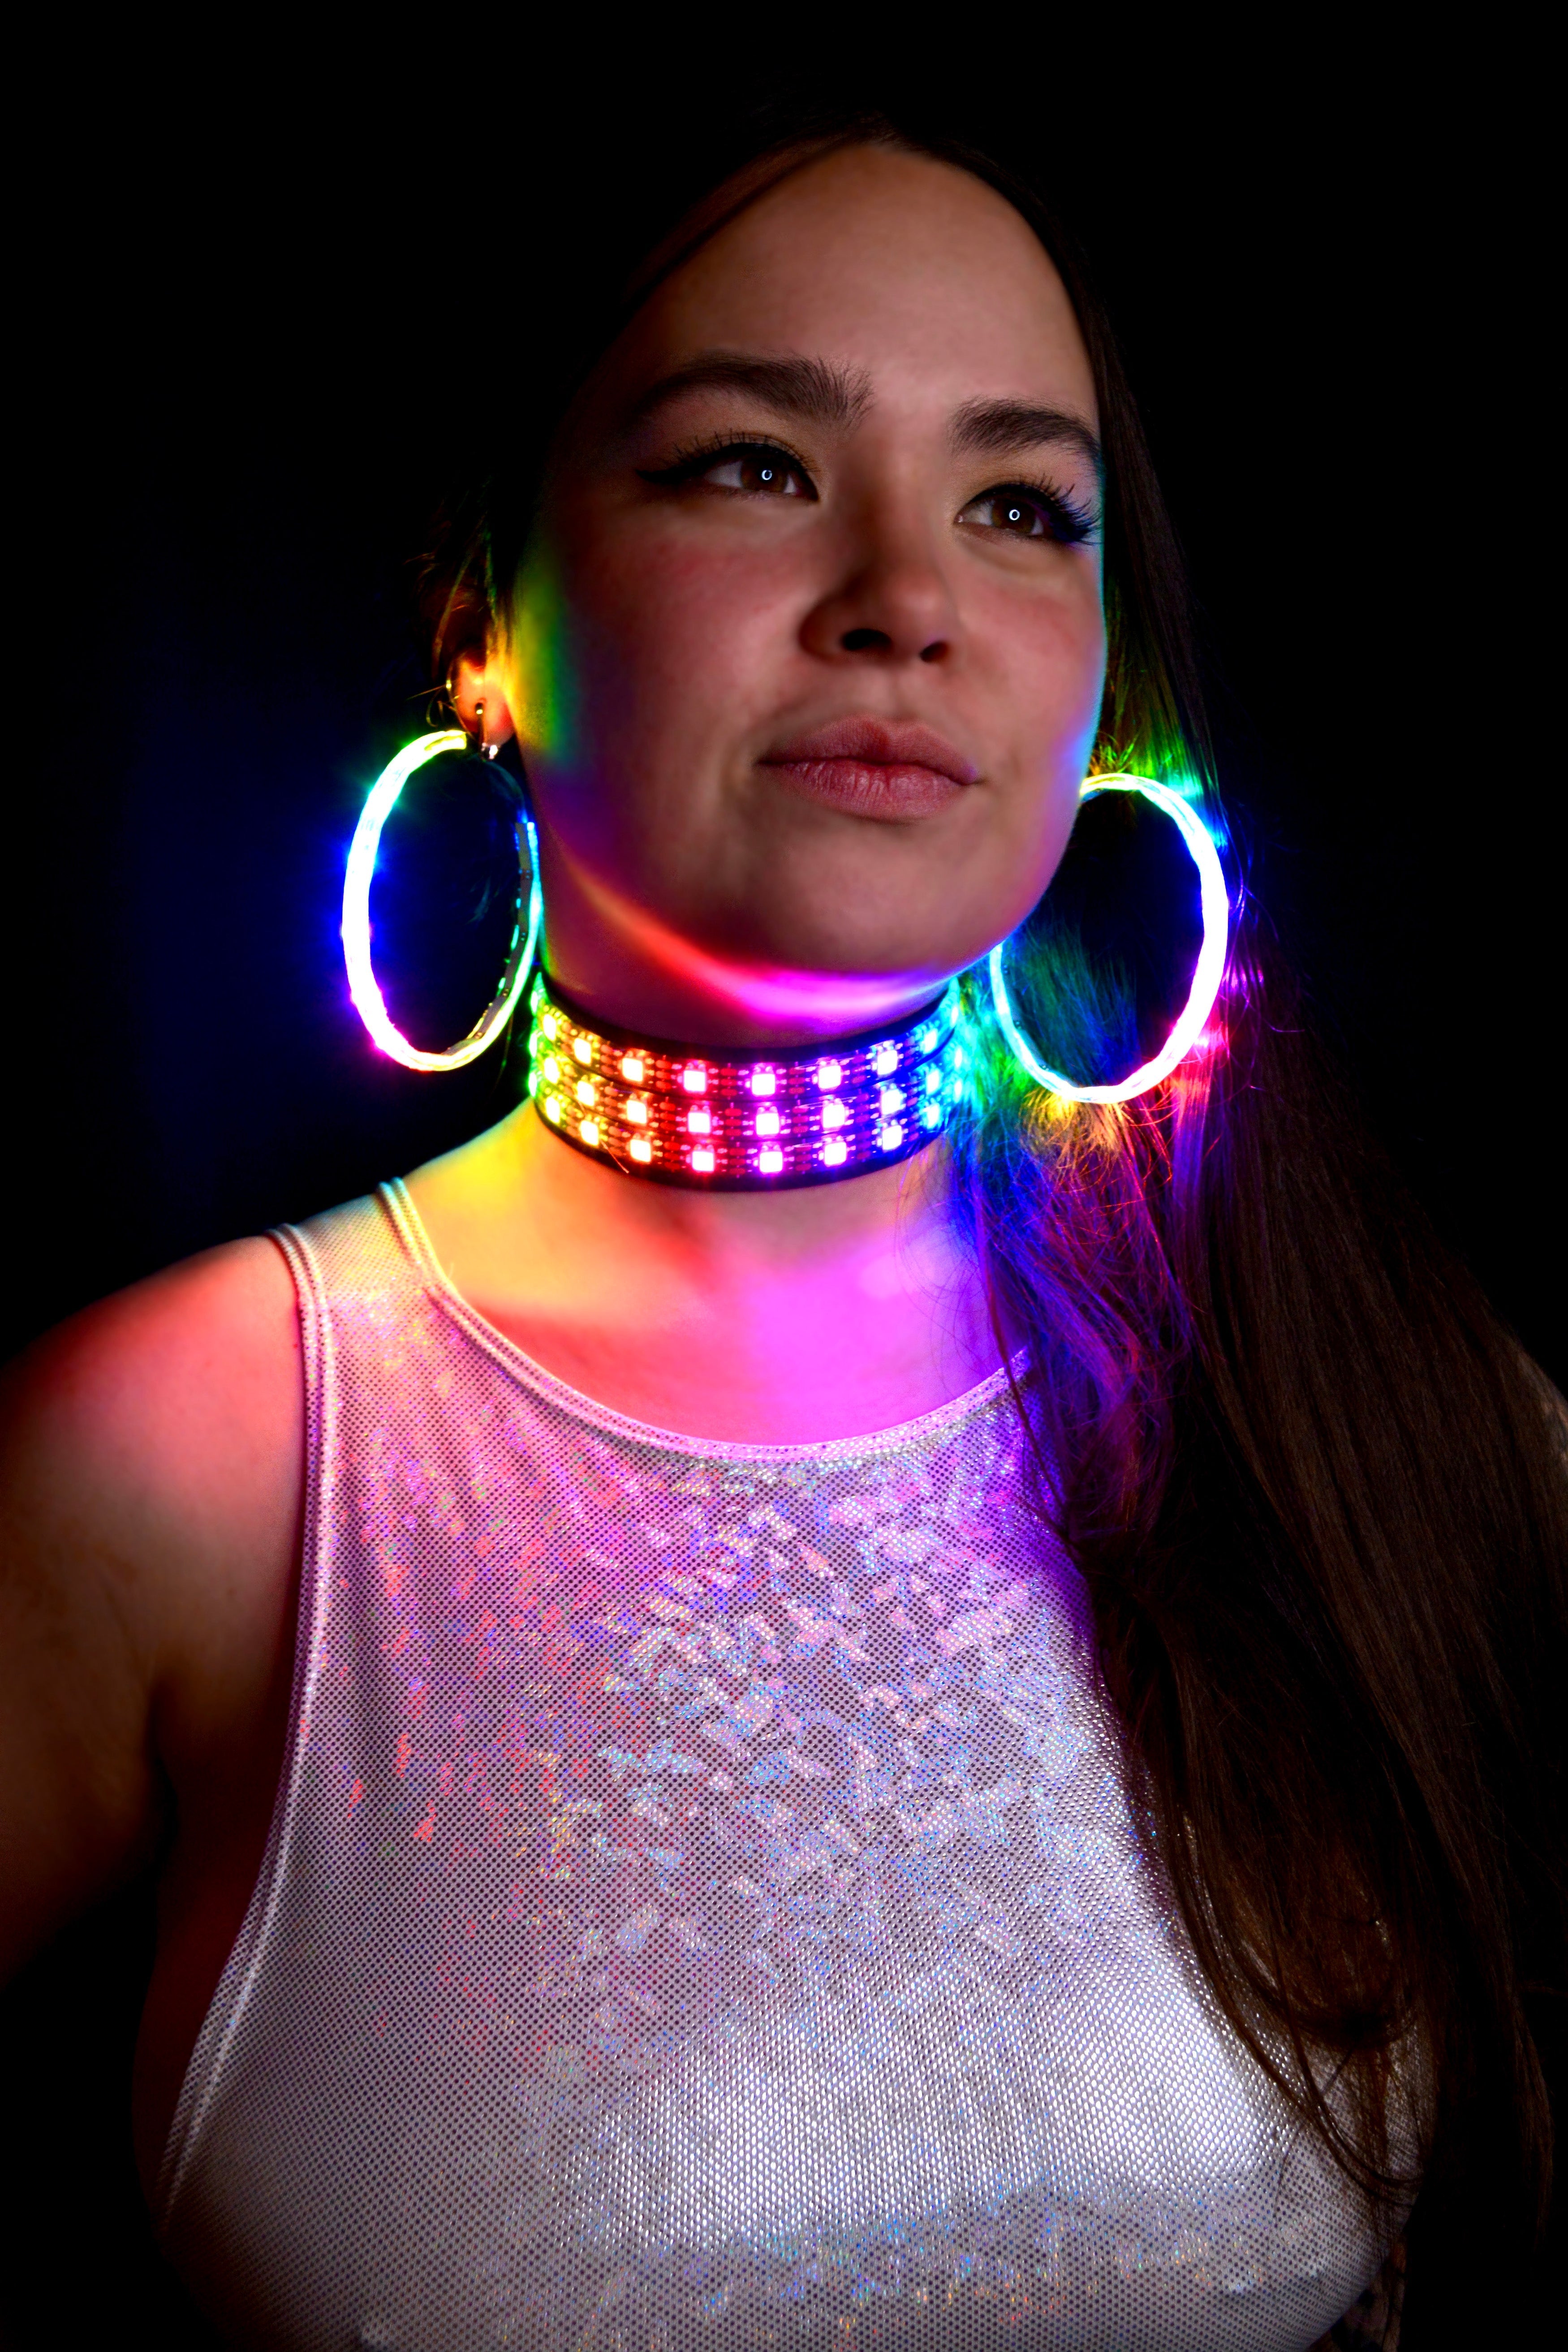 model wearing led choker and led earrings, posing with eyes up wearing a sparkly top